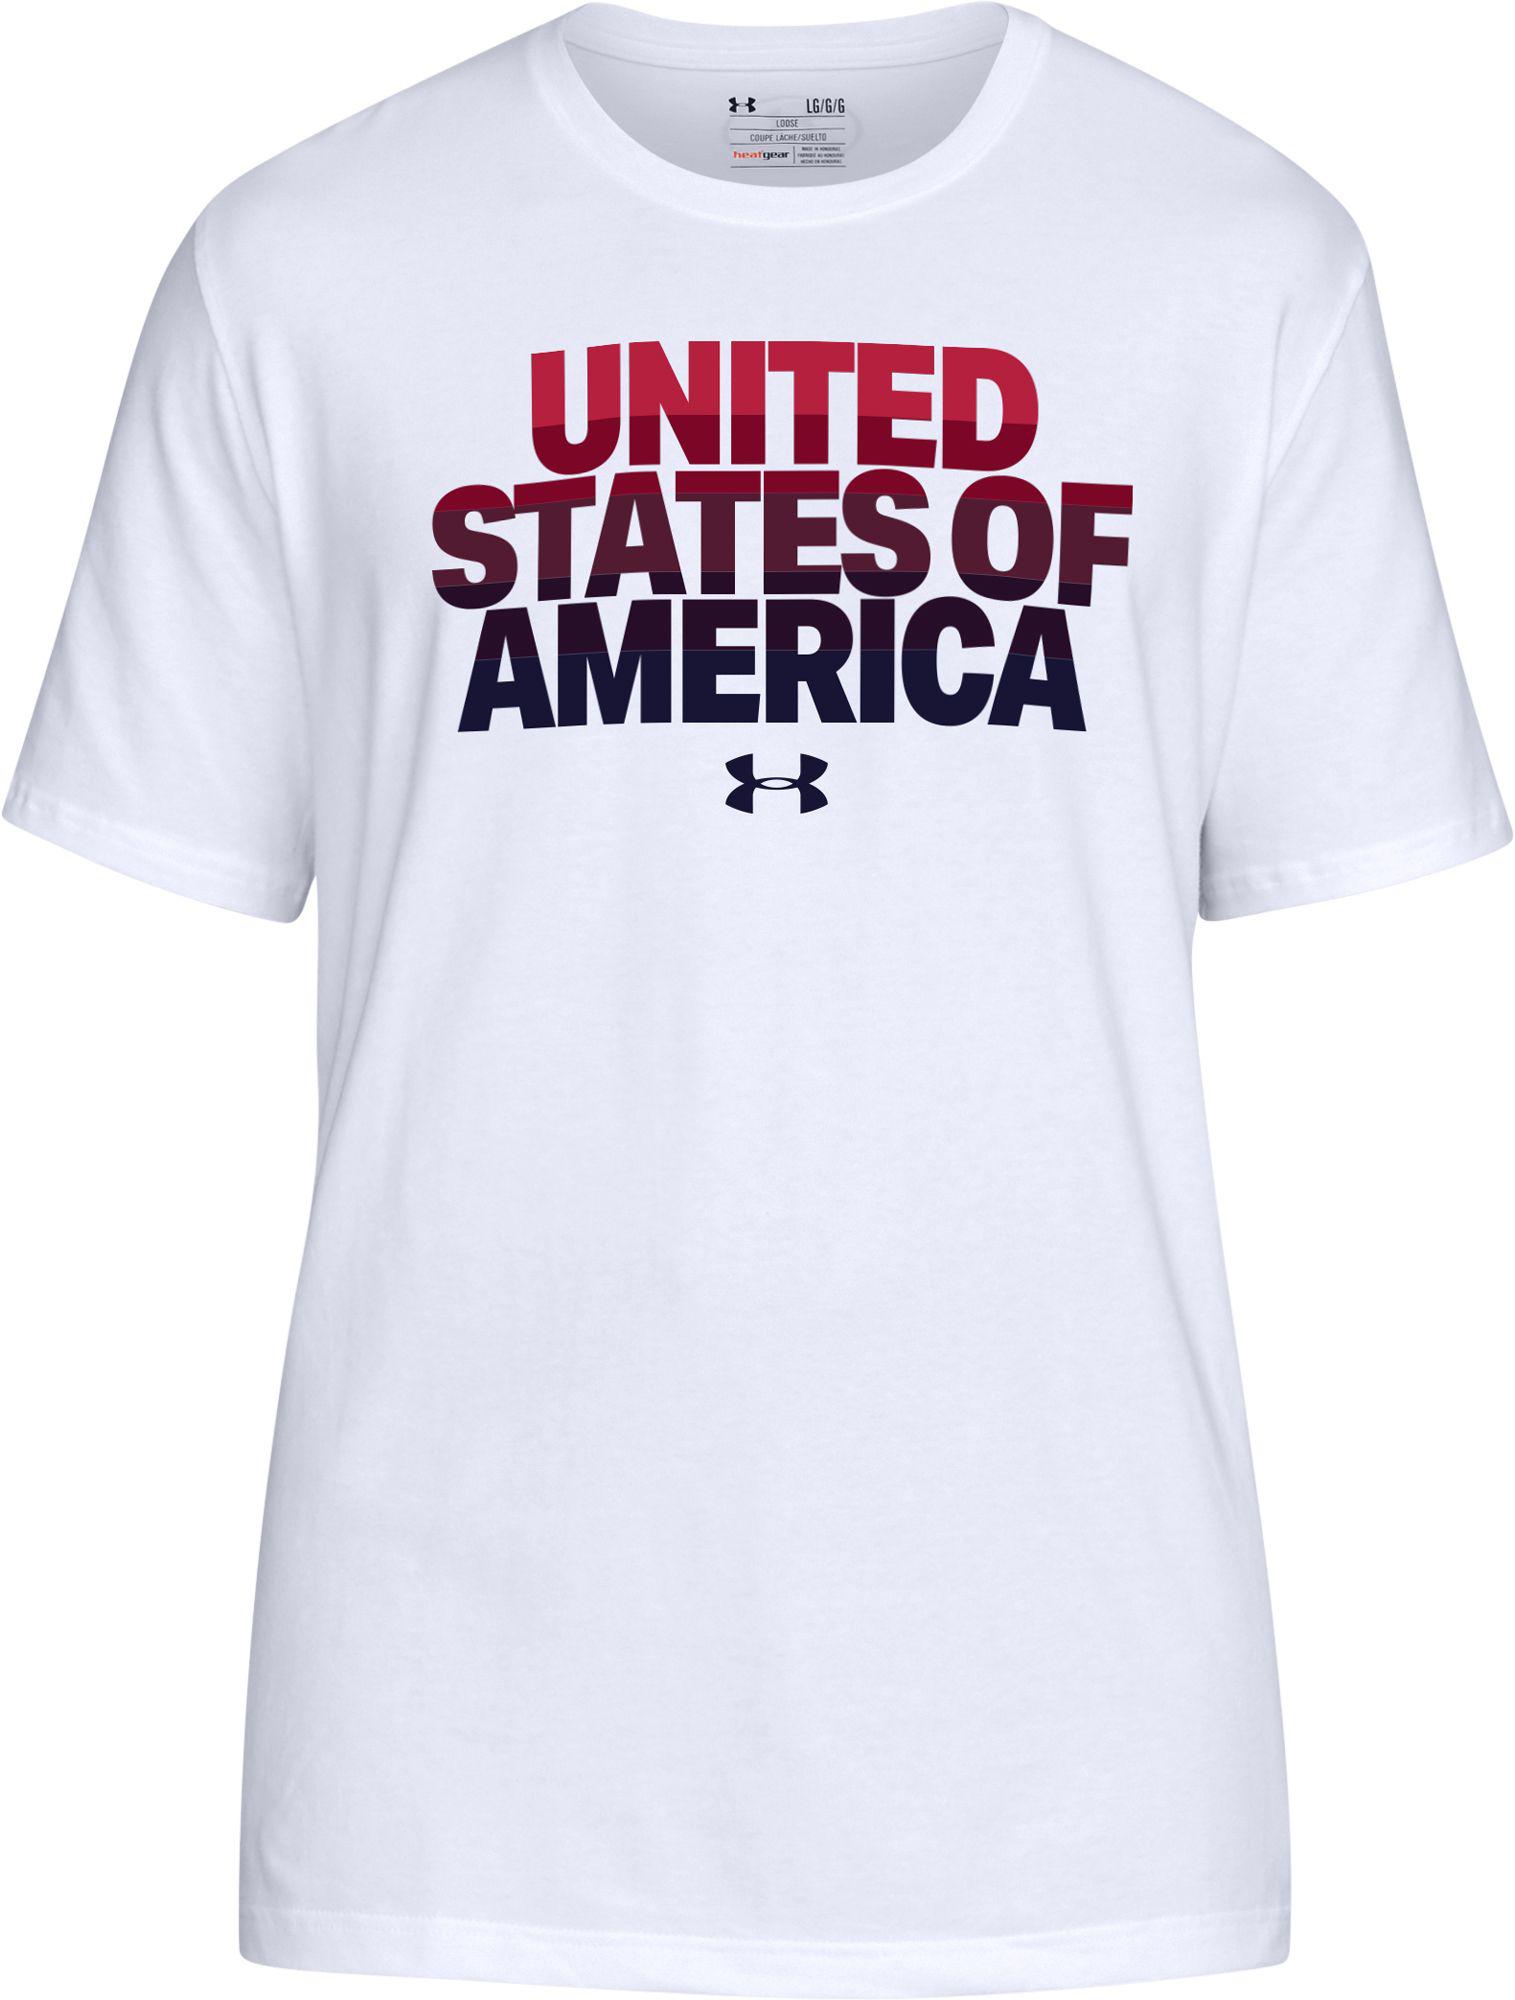 Download Under Armour Cotton United States Of America Graphic T ...